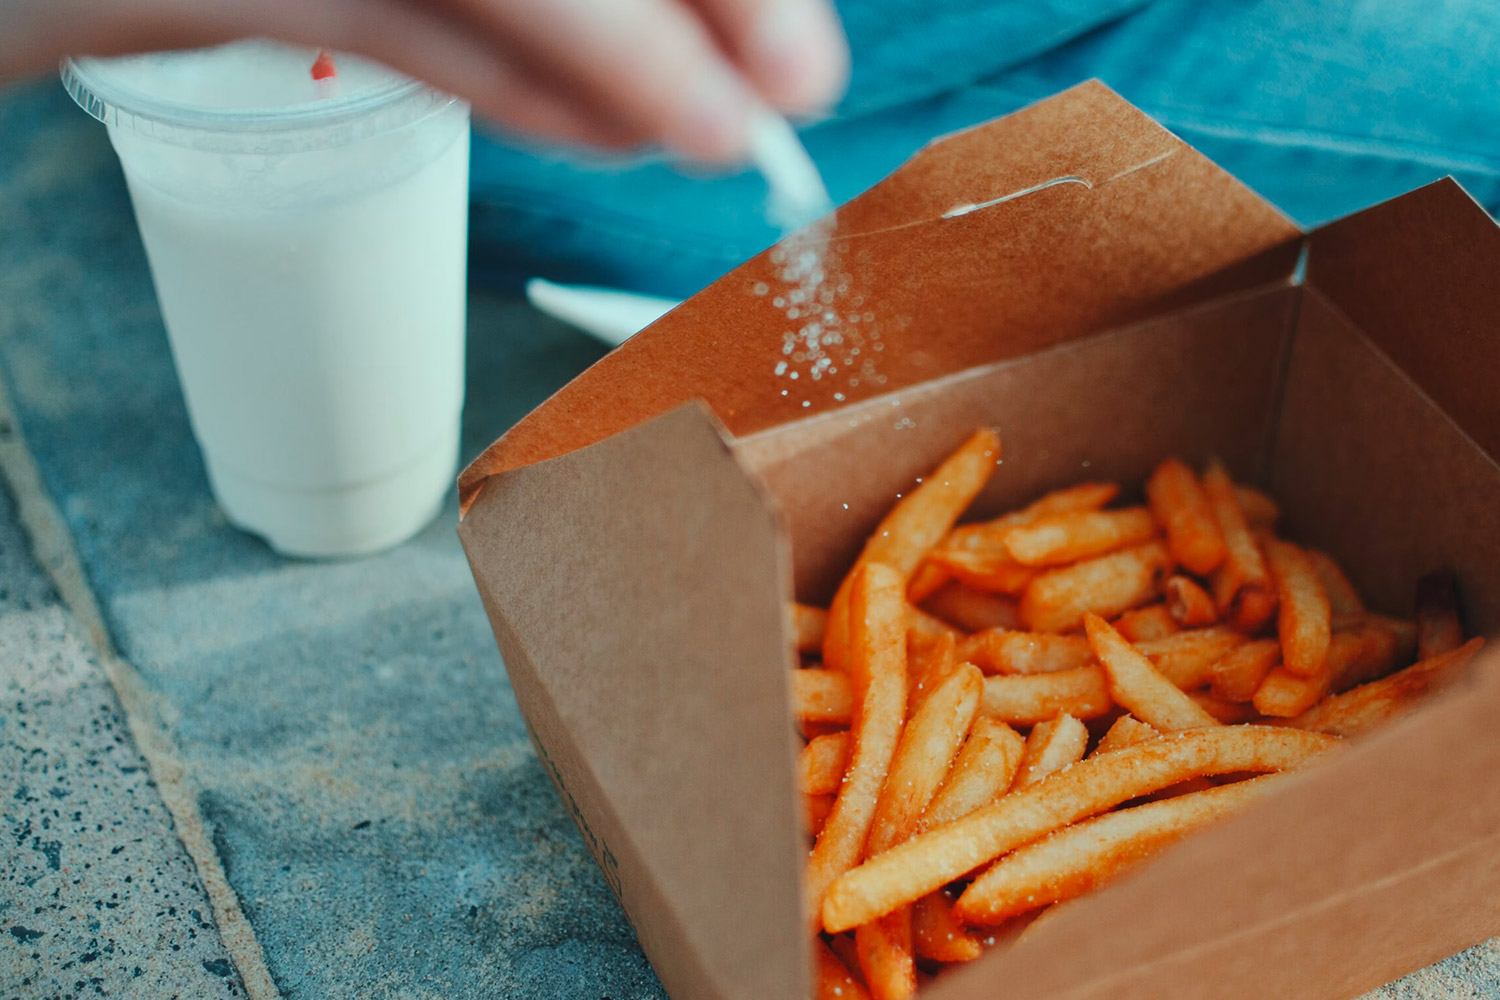 French fries served in a cardboard box on blue tiles and a hand sprinkling salt over them